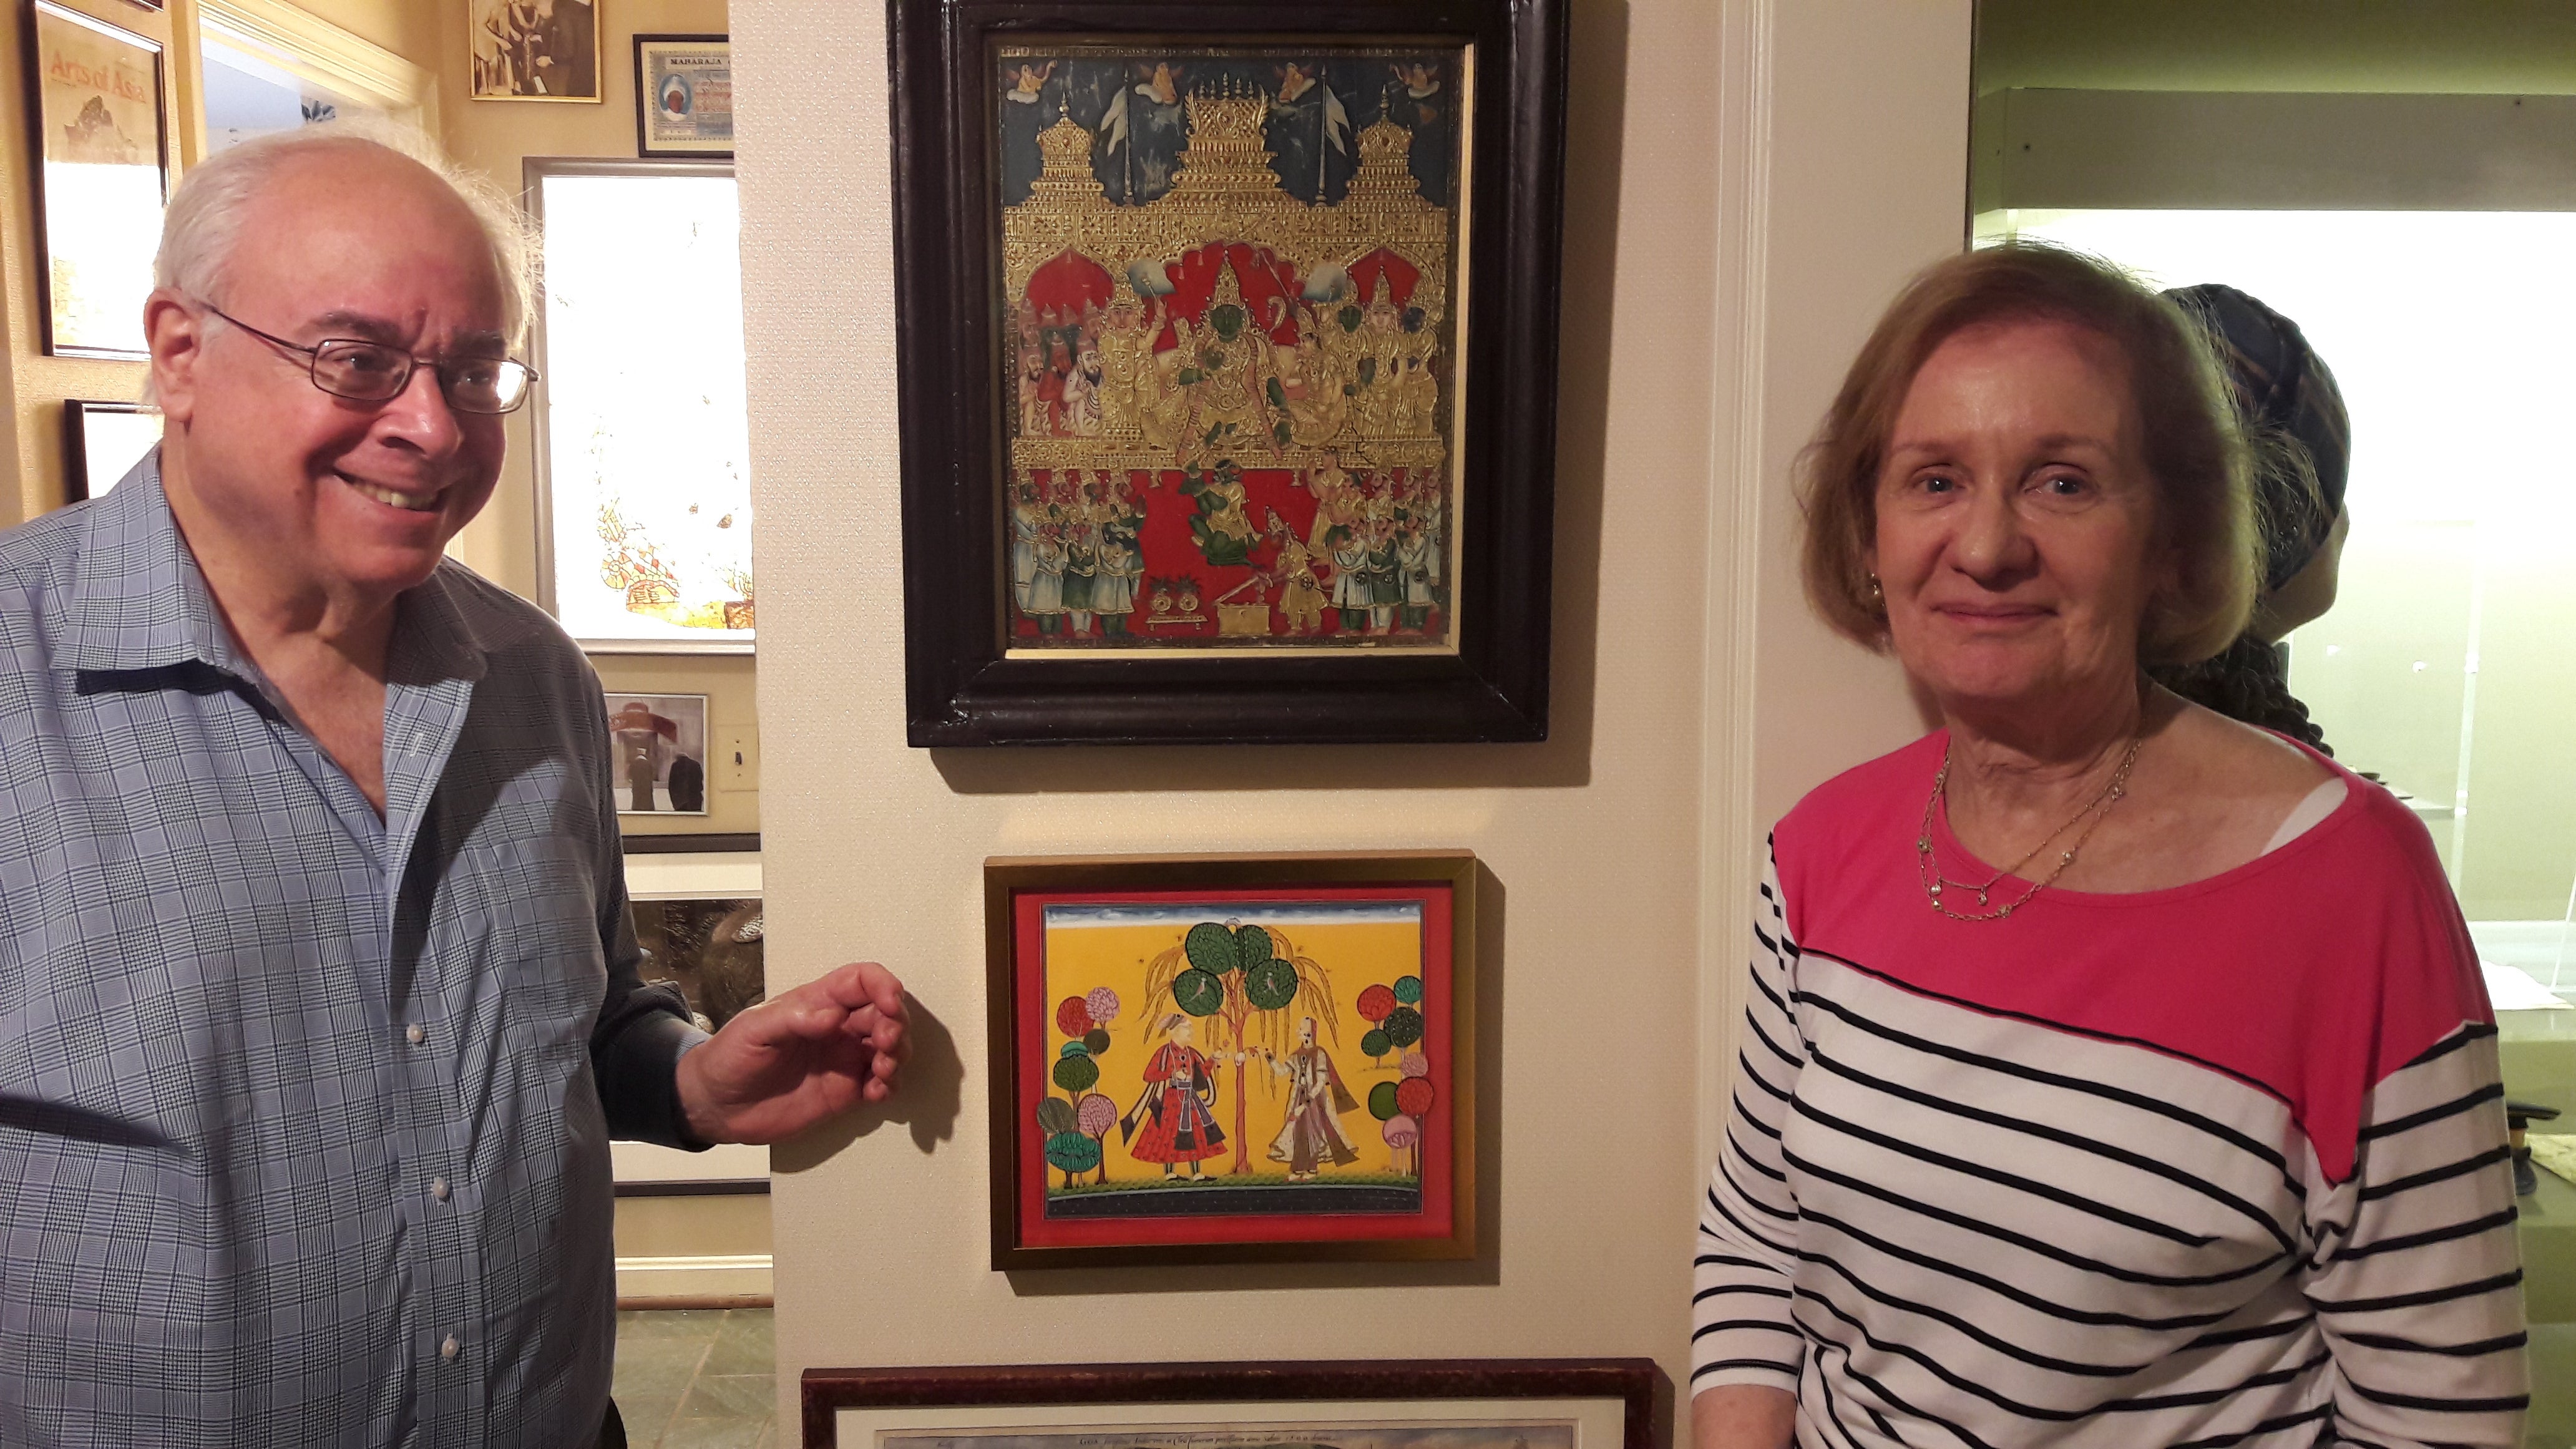 Two individuals standing next to framed artworks.